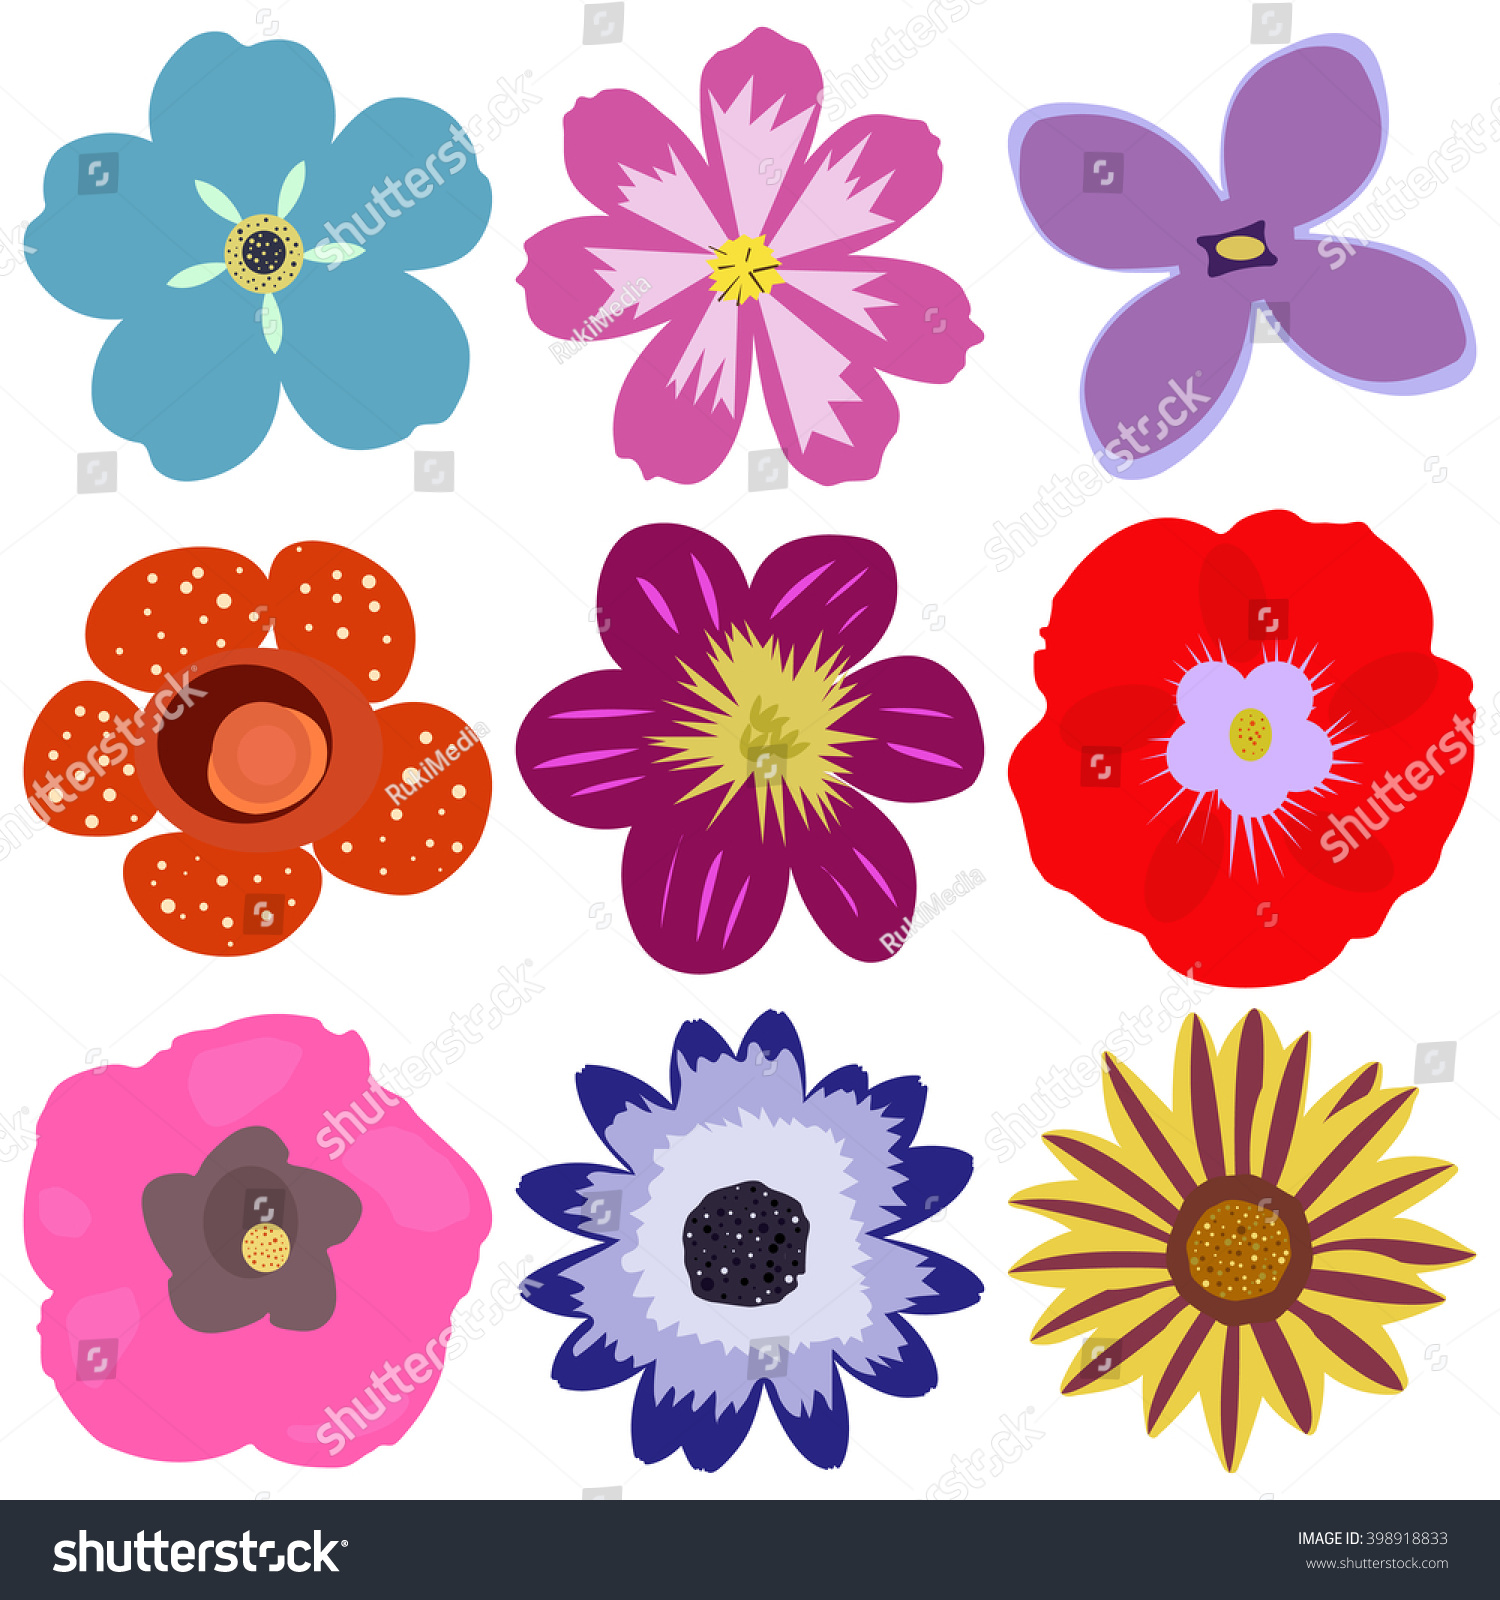 Isolated Colorful Flower Vector Set Eps10 Stock Vector 398918833 ...